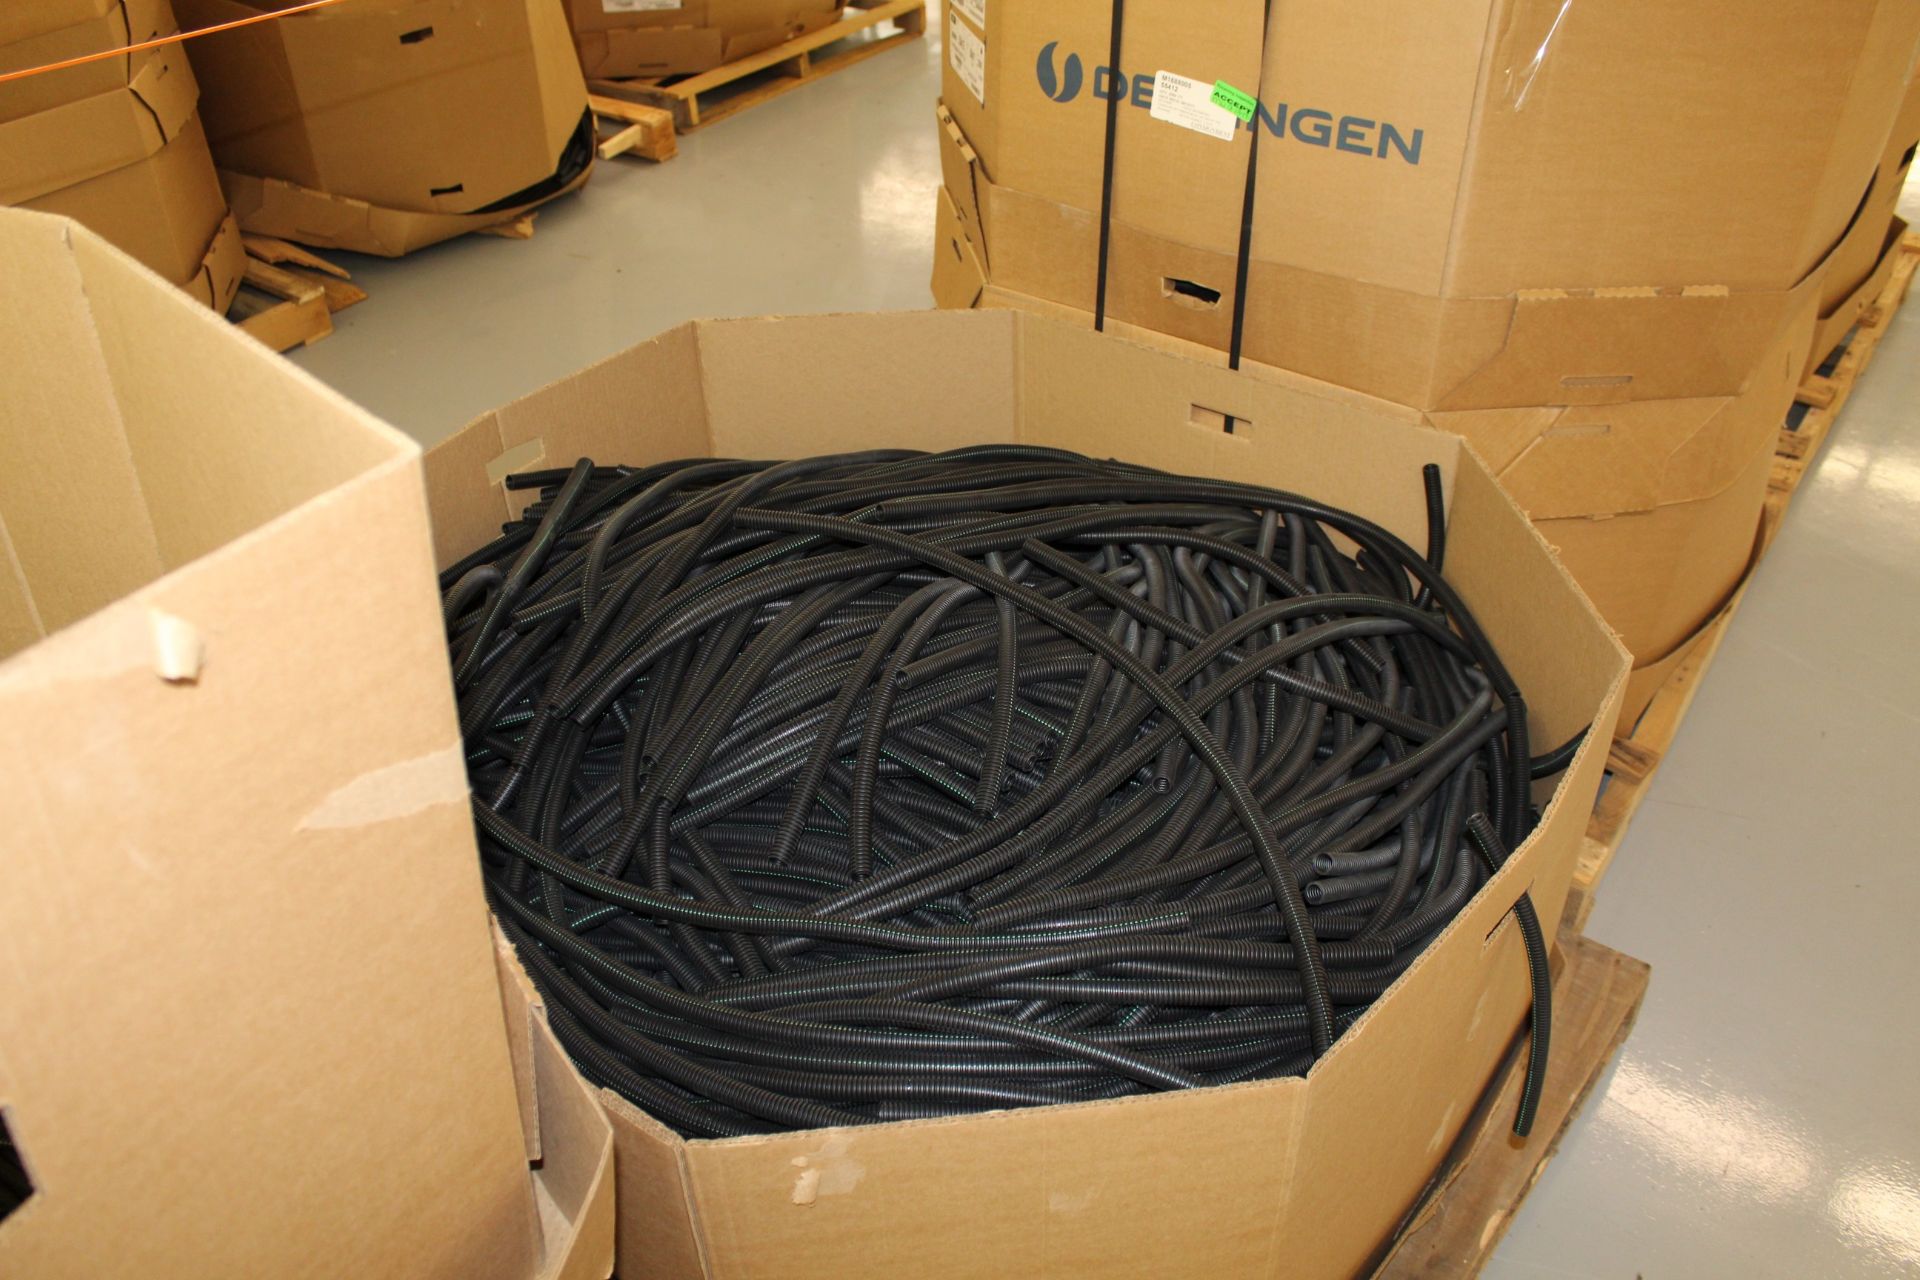 (20) Pallets Delfingen Convoluted Tubing/Wire Wrap, Some Foil Containers, Some Cuts, Various Sizes - Image 3 of 5